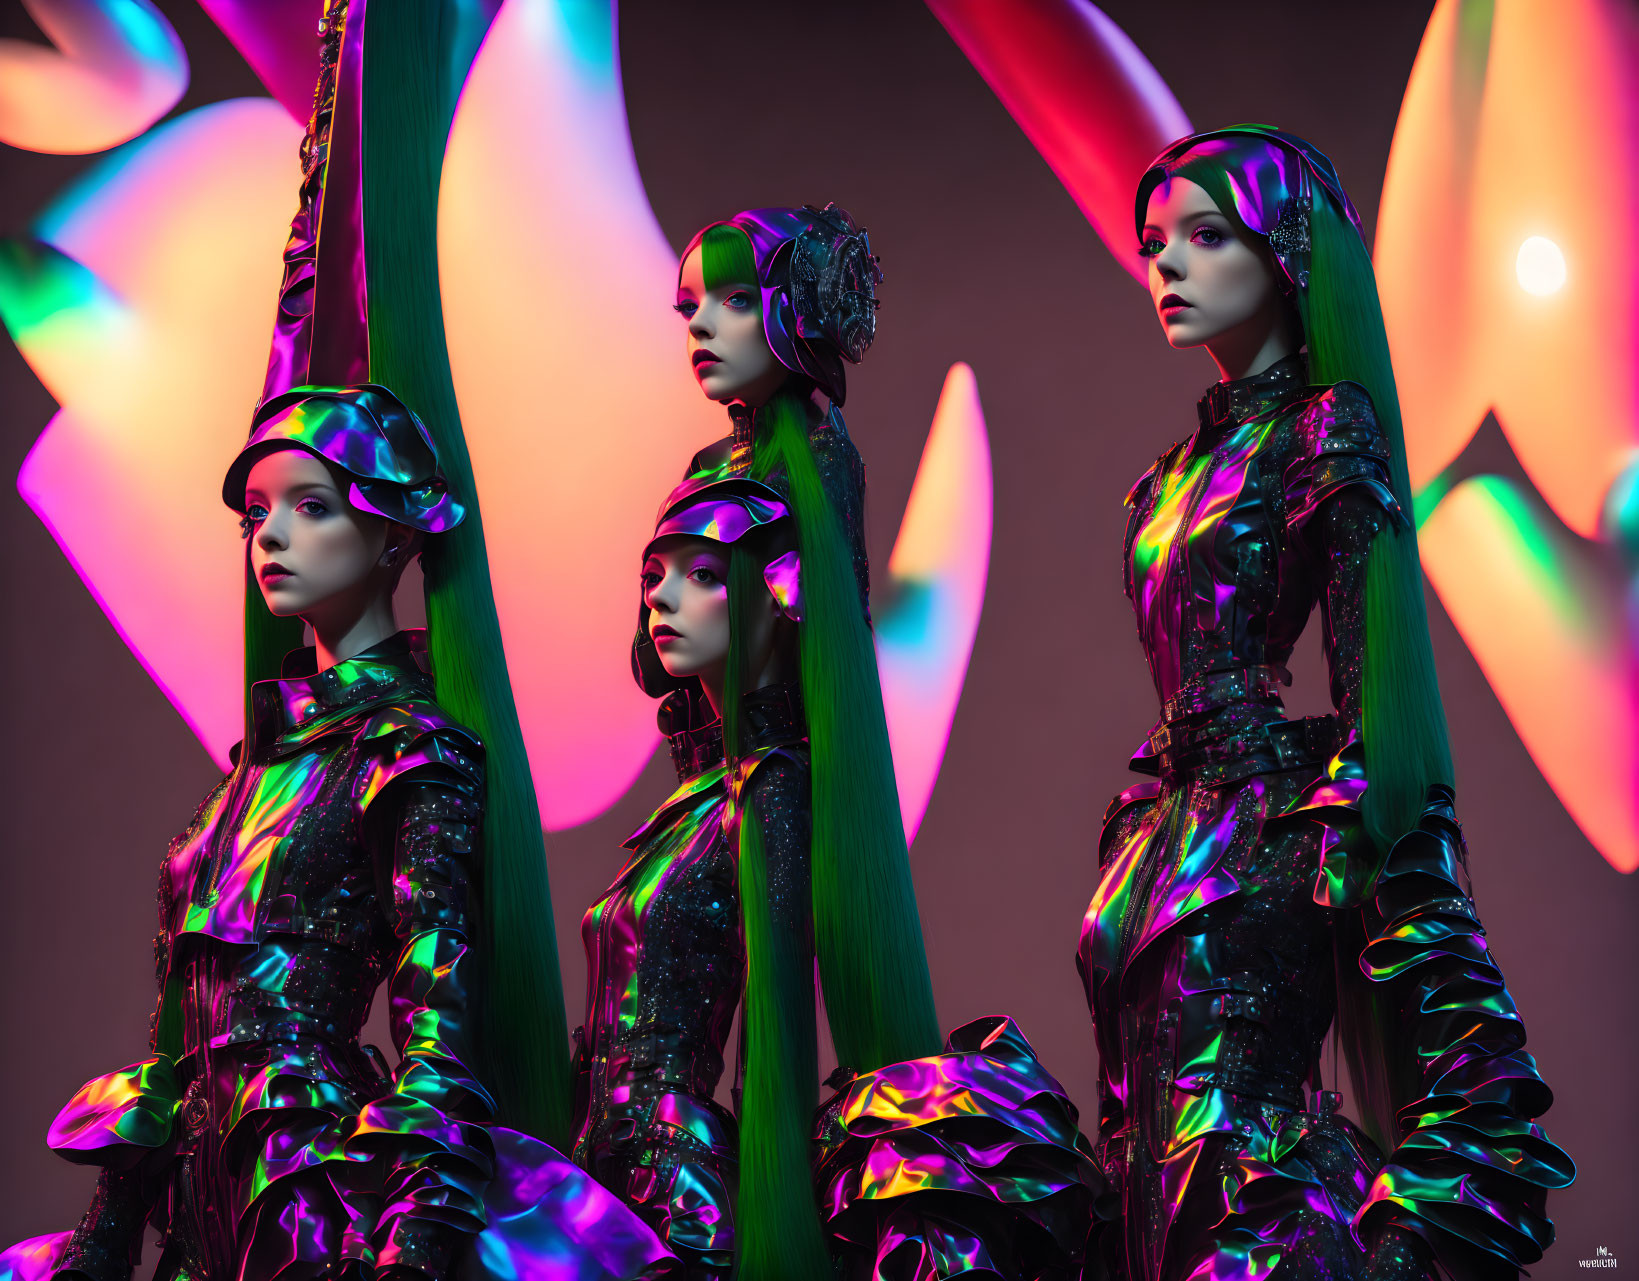 Four futuristic stylized female figures in iridescent outfits and sleek helmets against a backdrop of colorful abstract